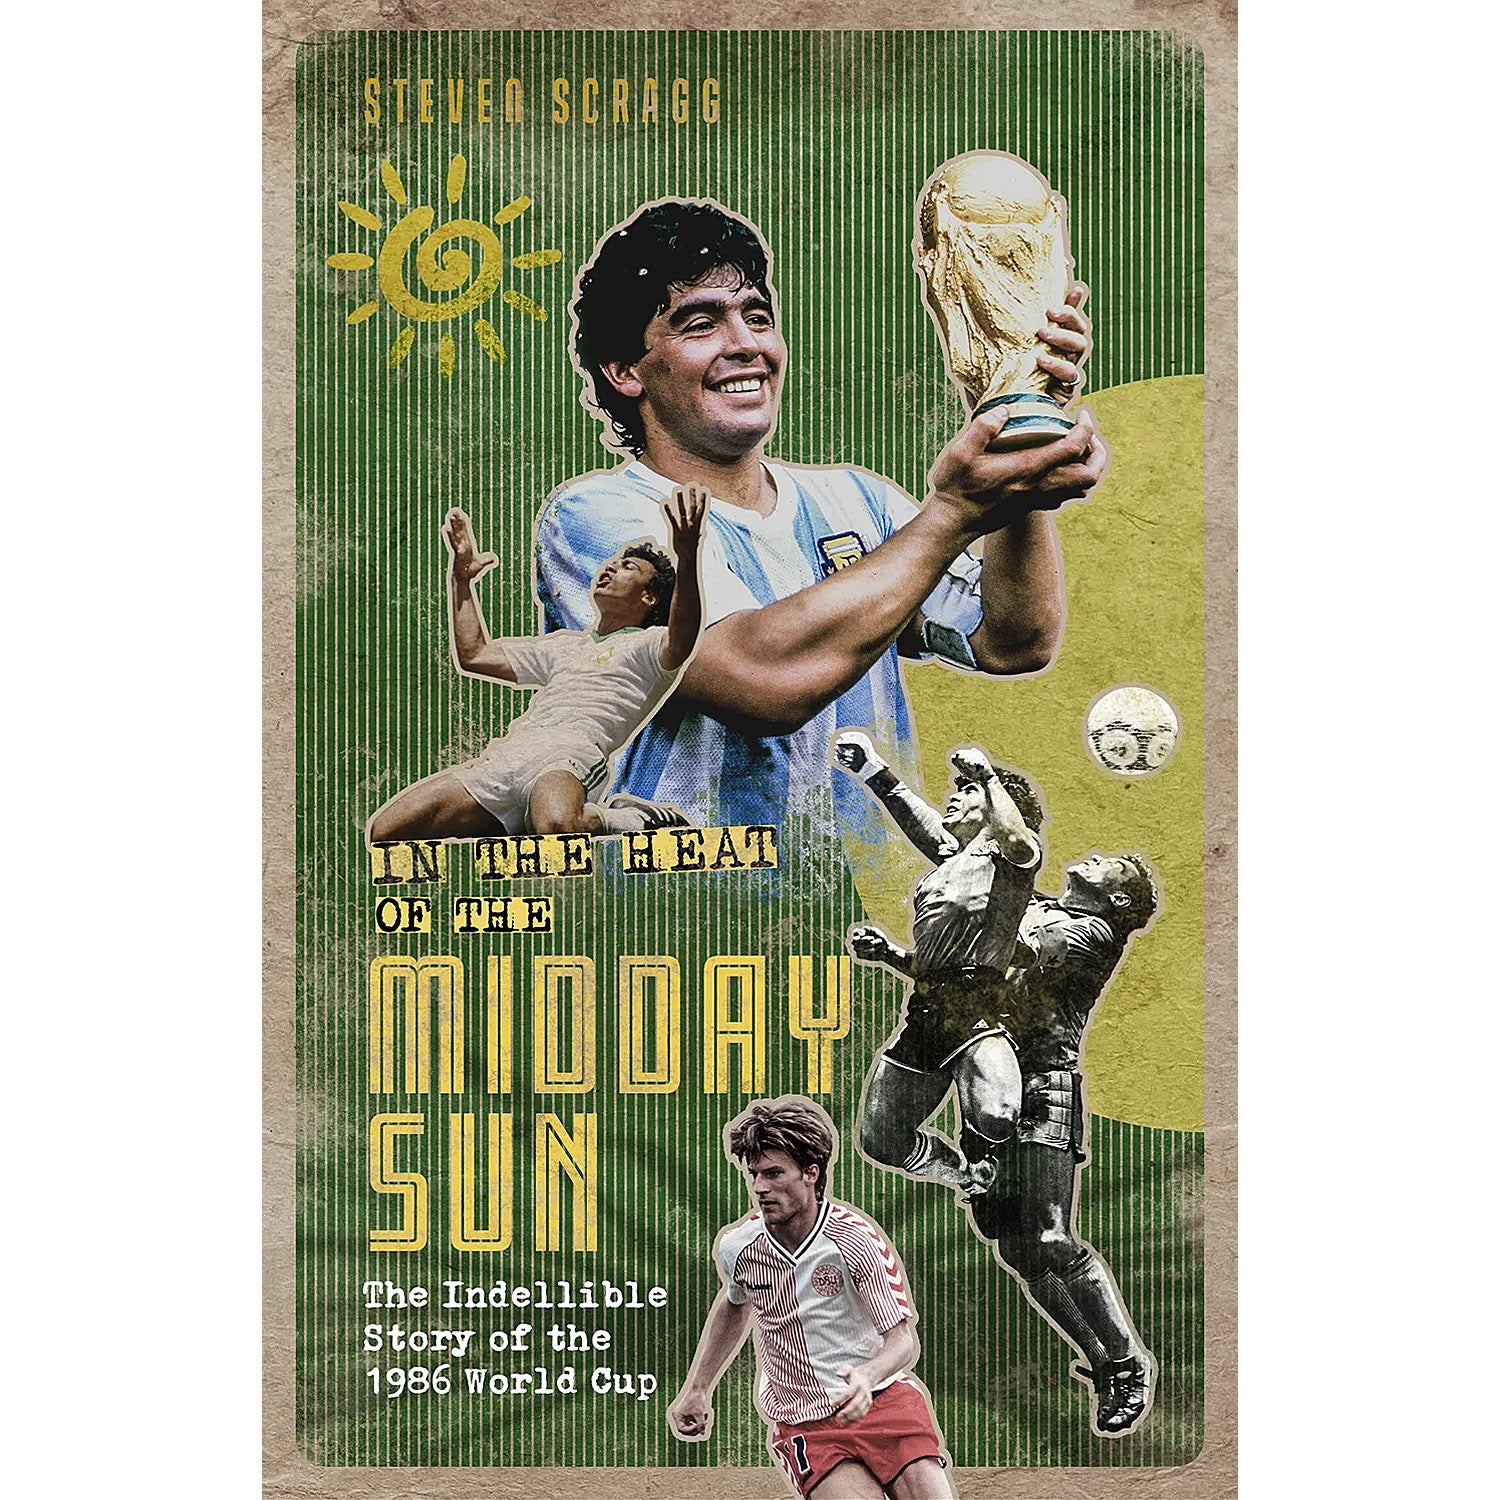 In the Heat of the Midday Sun – The Indelible Story of the 1986 World Cup